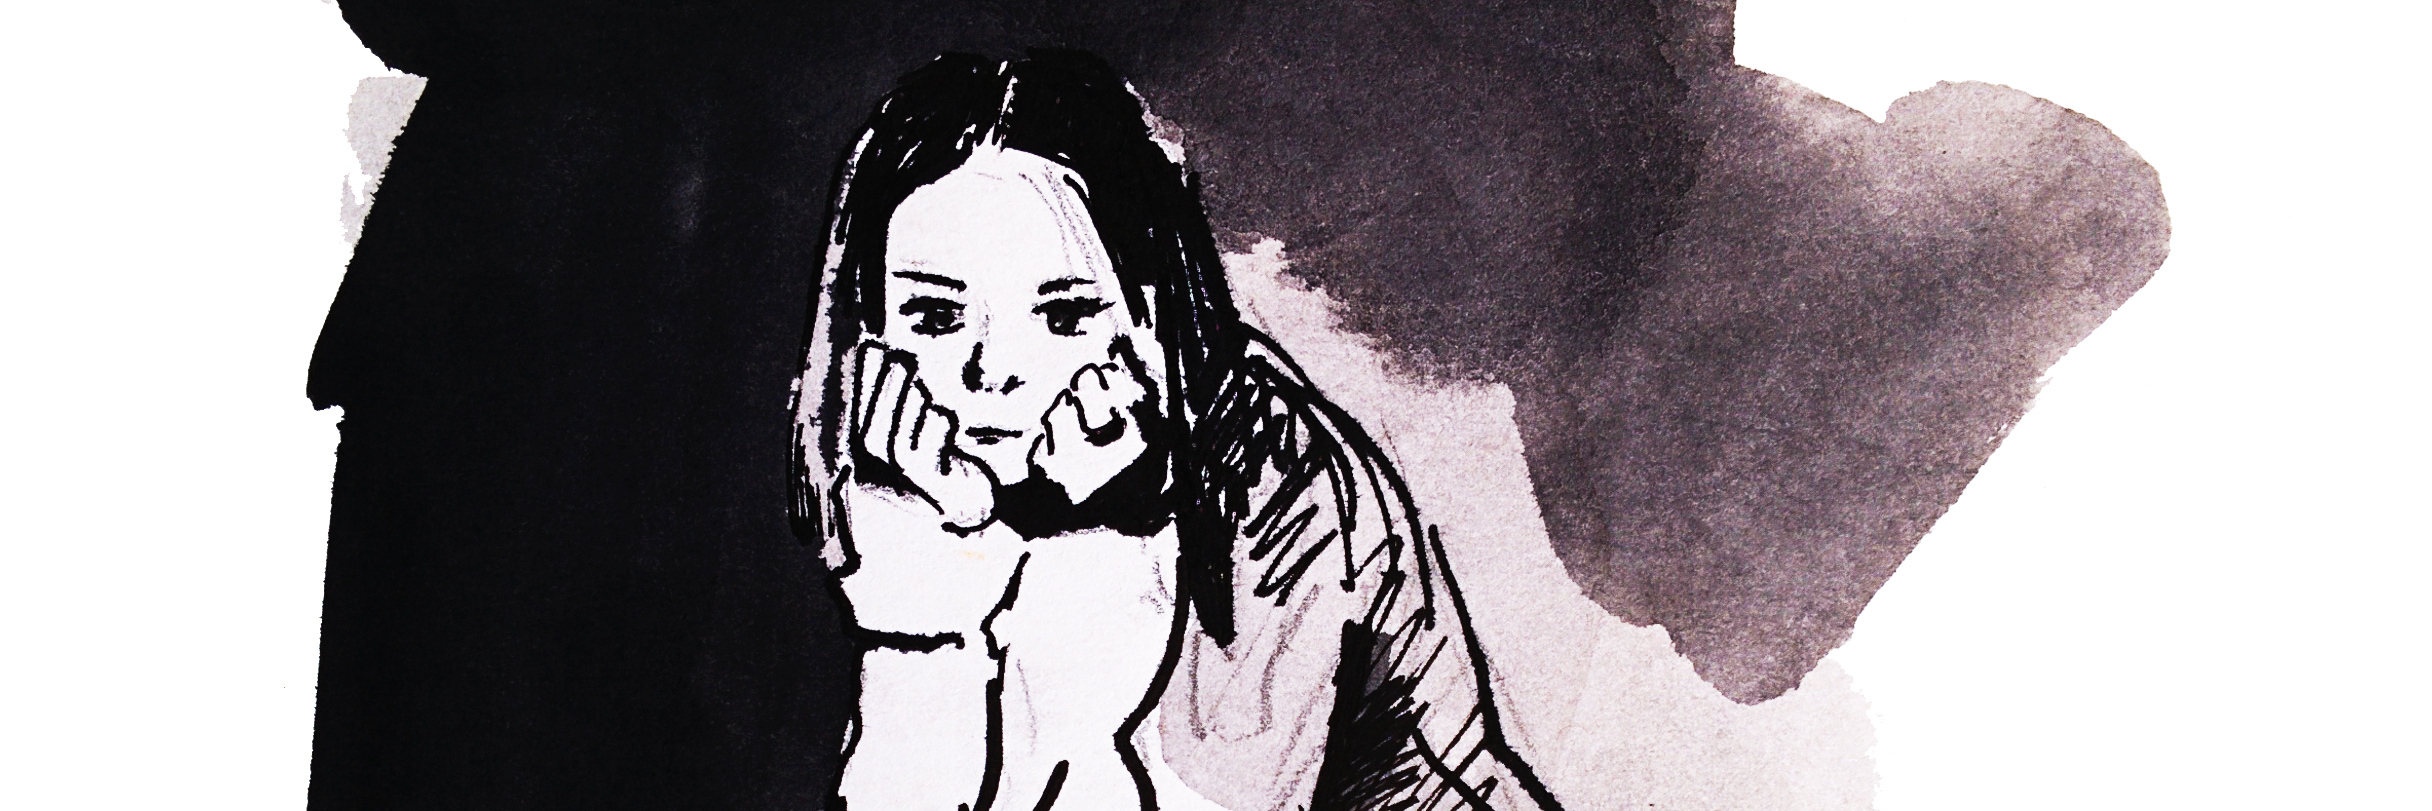 An illustration of a girl sitting, looking at the ground, sad.